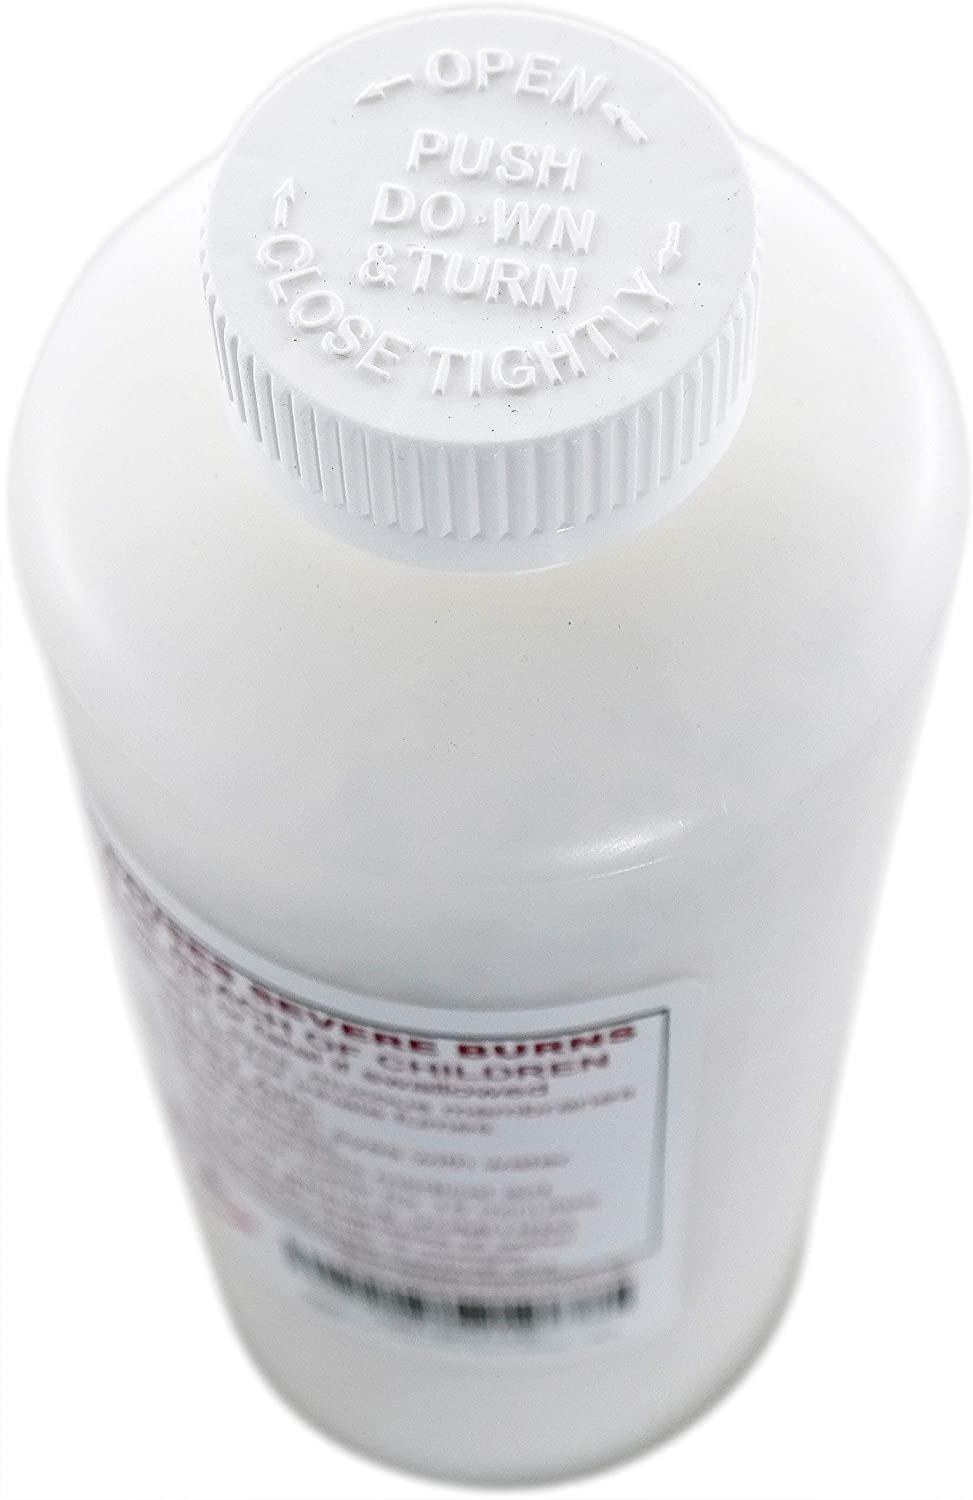  Sodium Hydroxide Lye Micro Beads 5 oz Bottle - Food Grade -  HDPE Container with resealable Child Resistant Cap : Health & Household